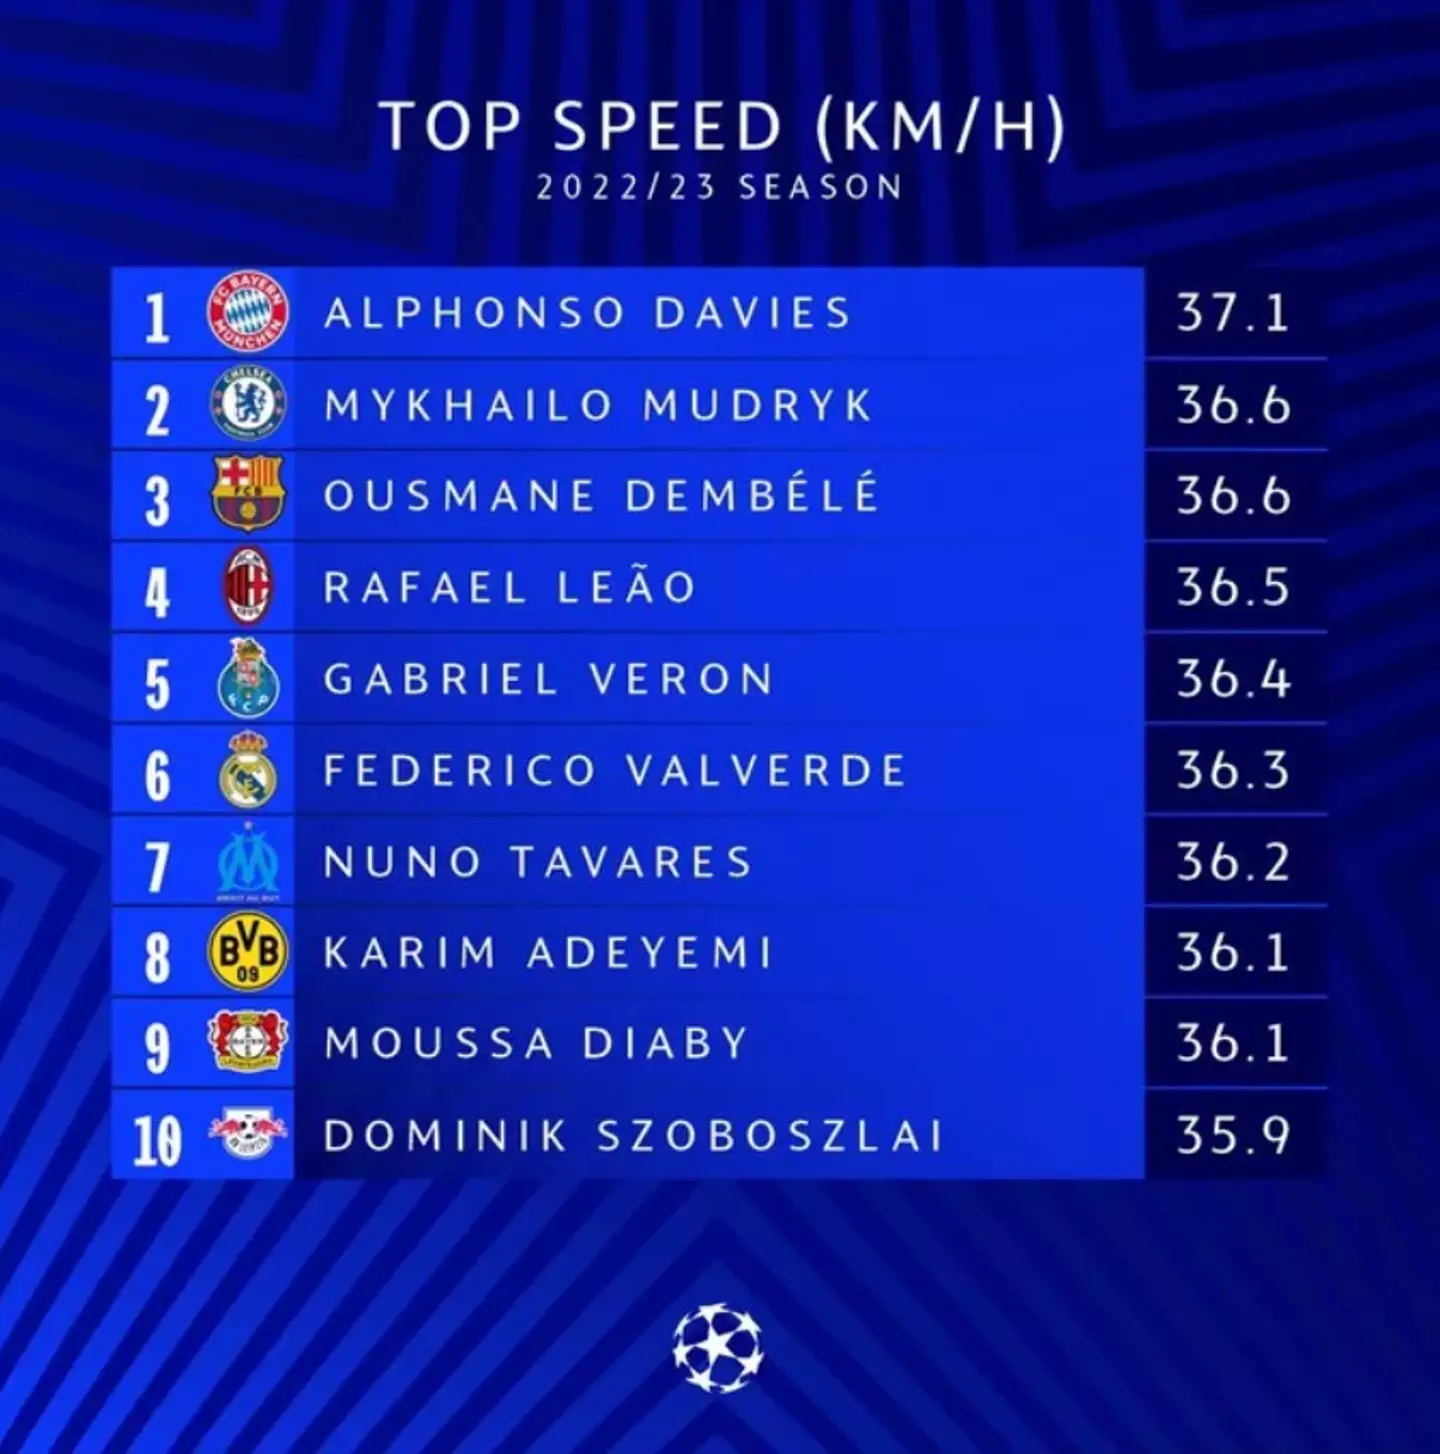 The Champions League's quickest players. Image: Reddit